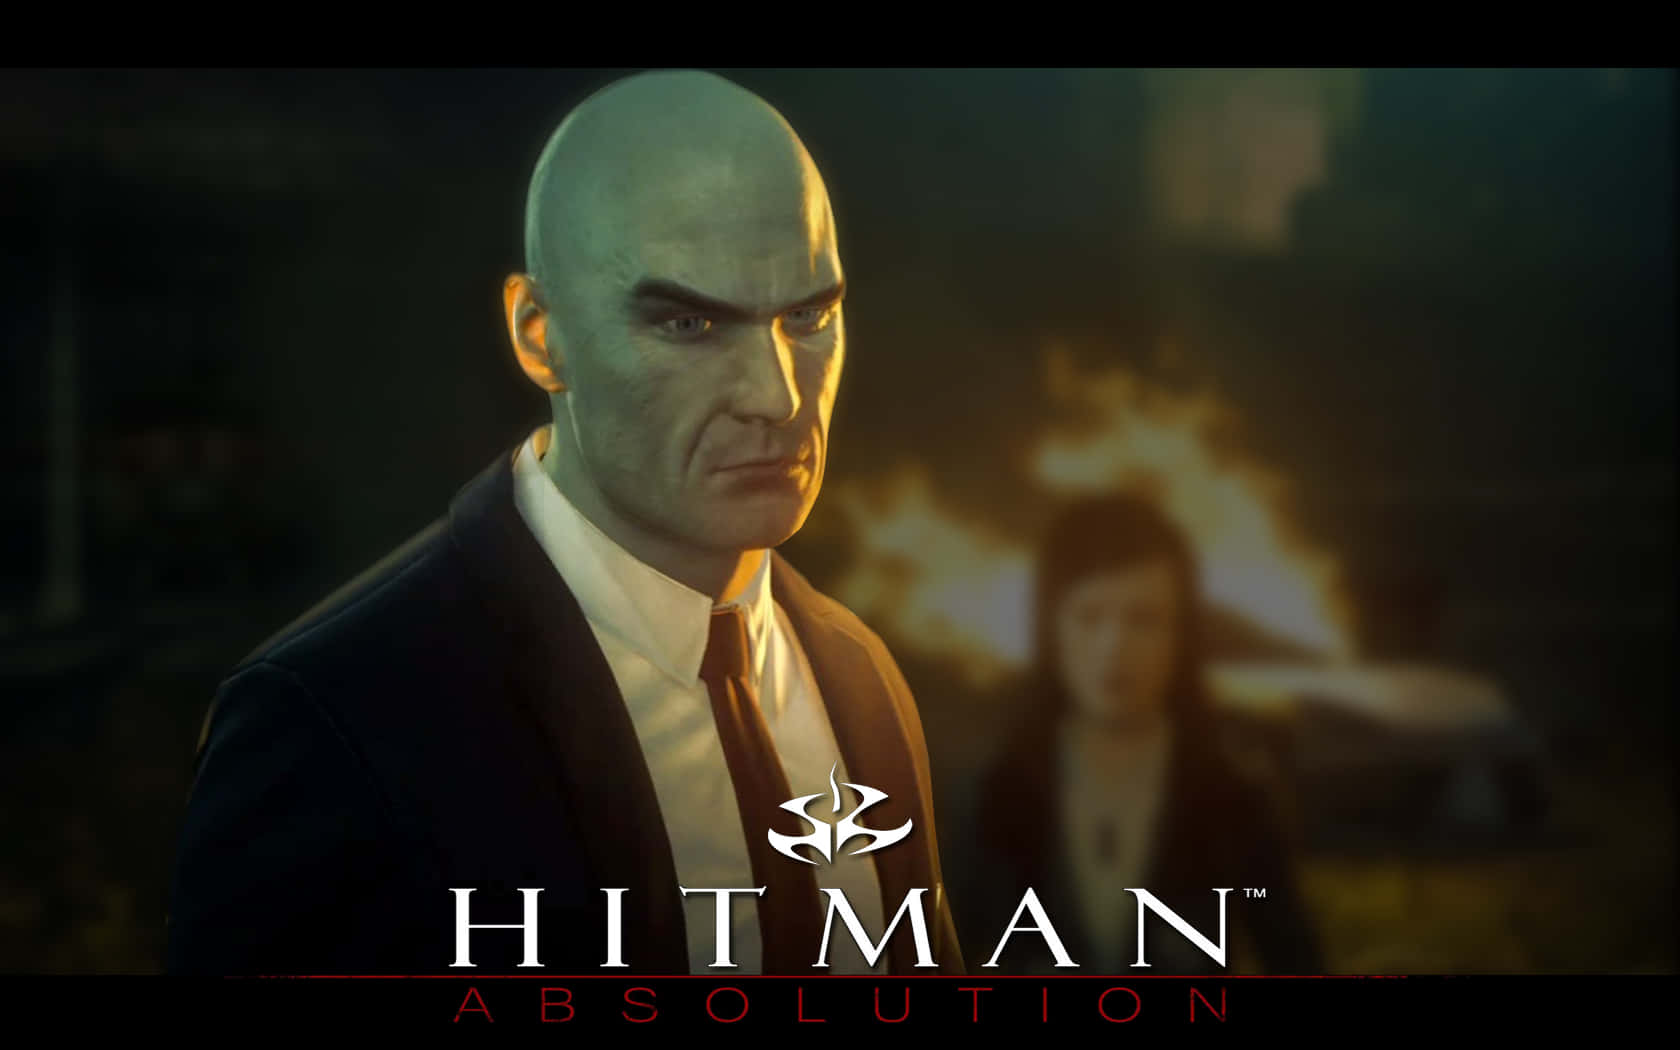 Agent 47 in the 'Hitman Absolution' game